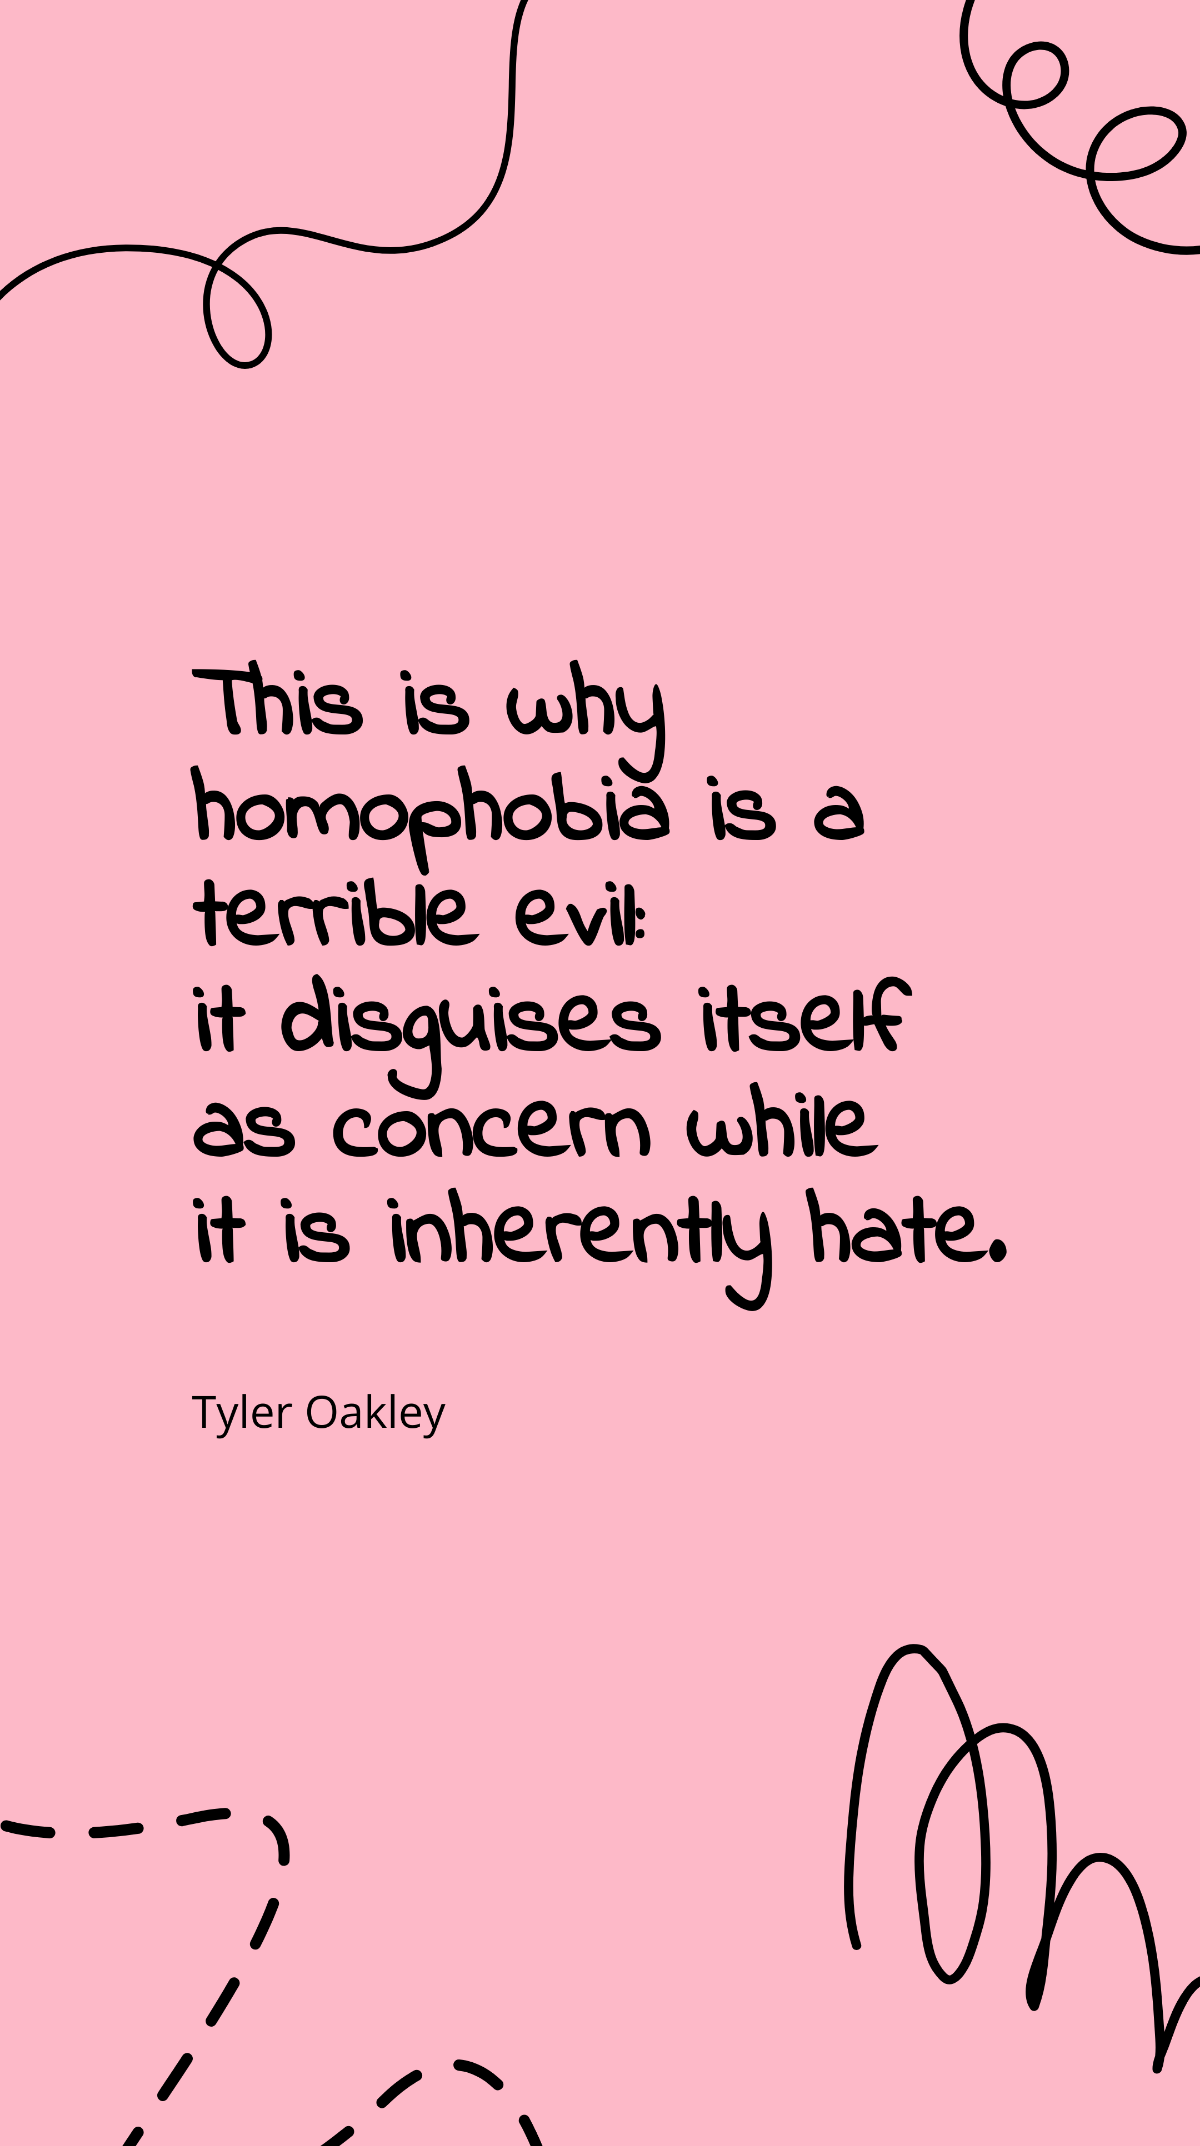 Tyler Oakley - This is why homophobia is a terrible evil: it disguises itself as concern while it is inherently hate. Template